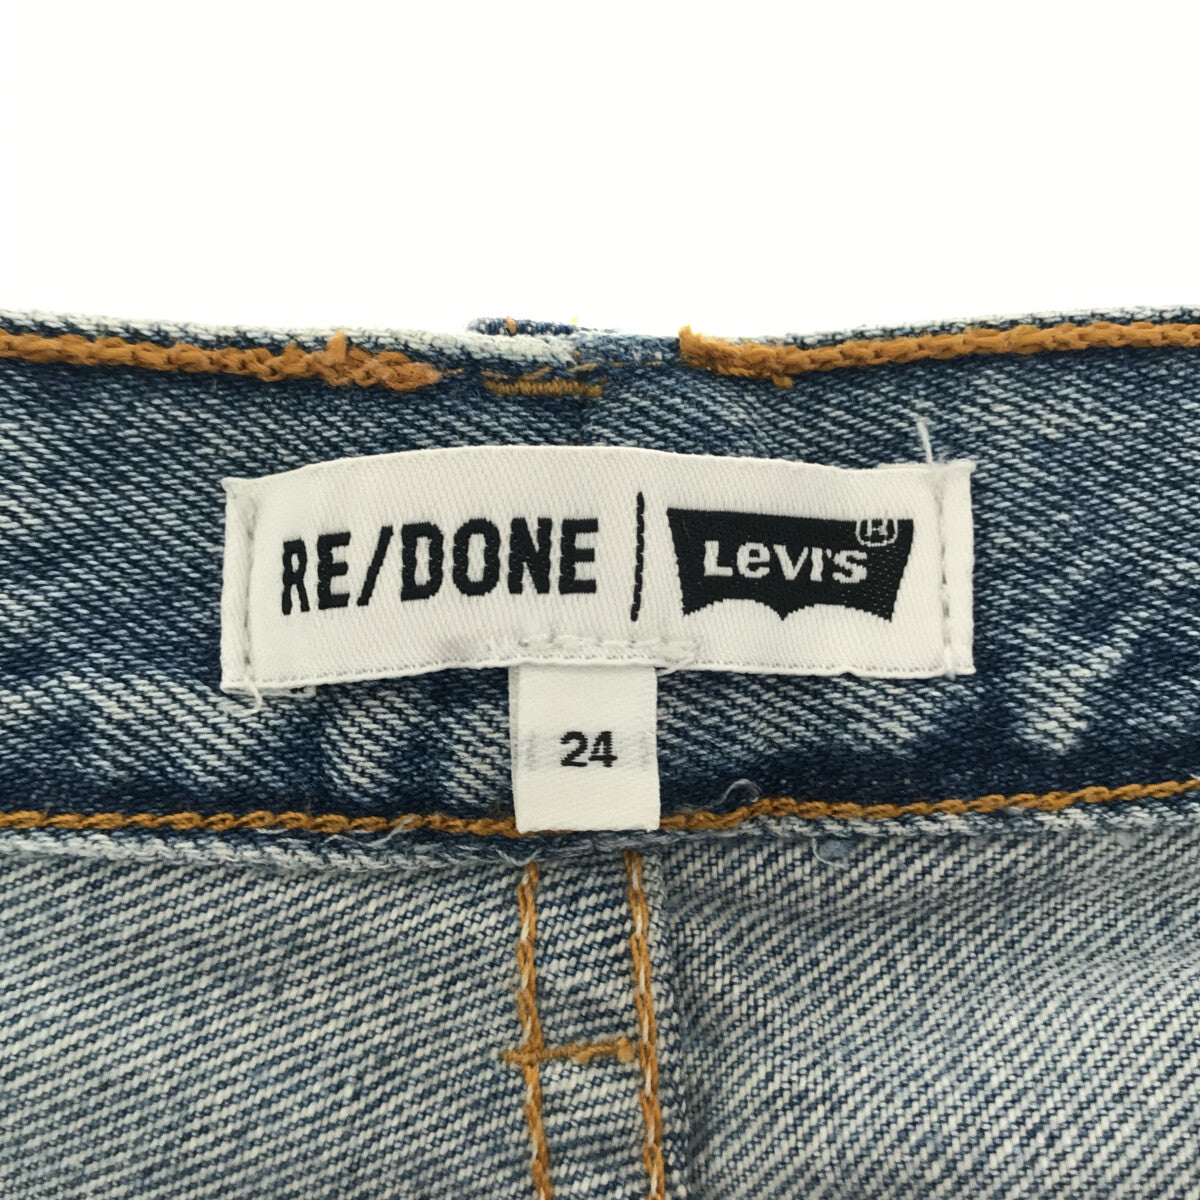 RE/DONE LEVISバージョン　24